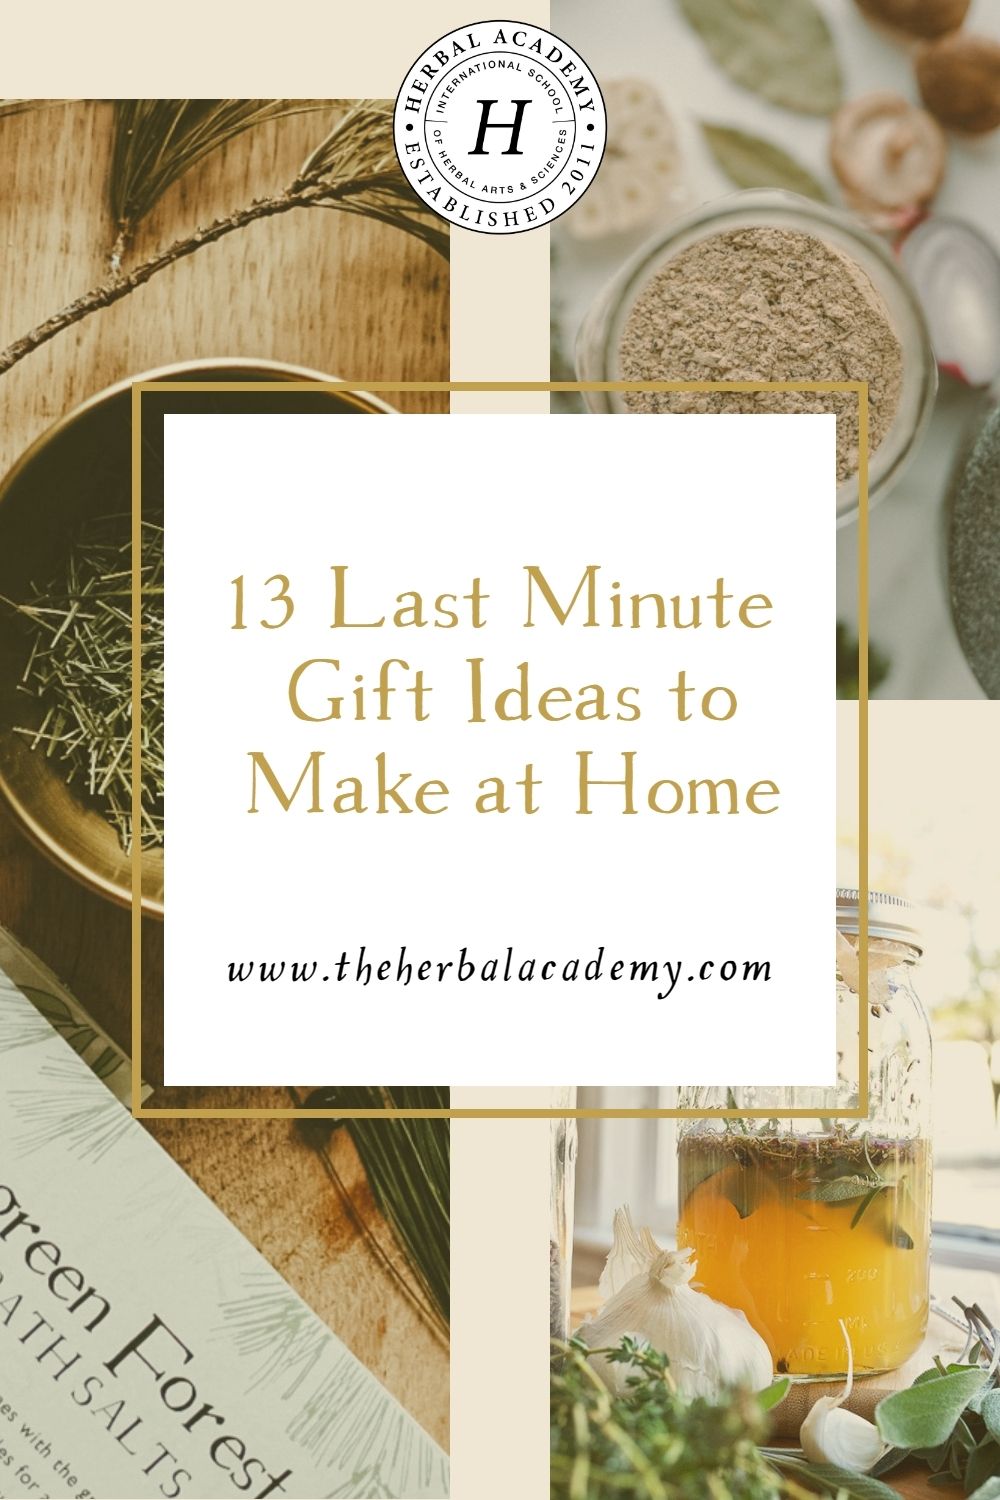 13 Last Minute Gift Ideas to Make at Home | The Herbal Academy | These last minute gift ideas are thoughtful, homemade options using herbs. Each gift is inexpensive and easy to make. Happy gifting!